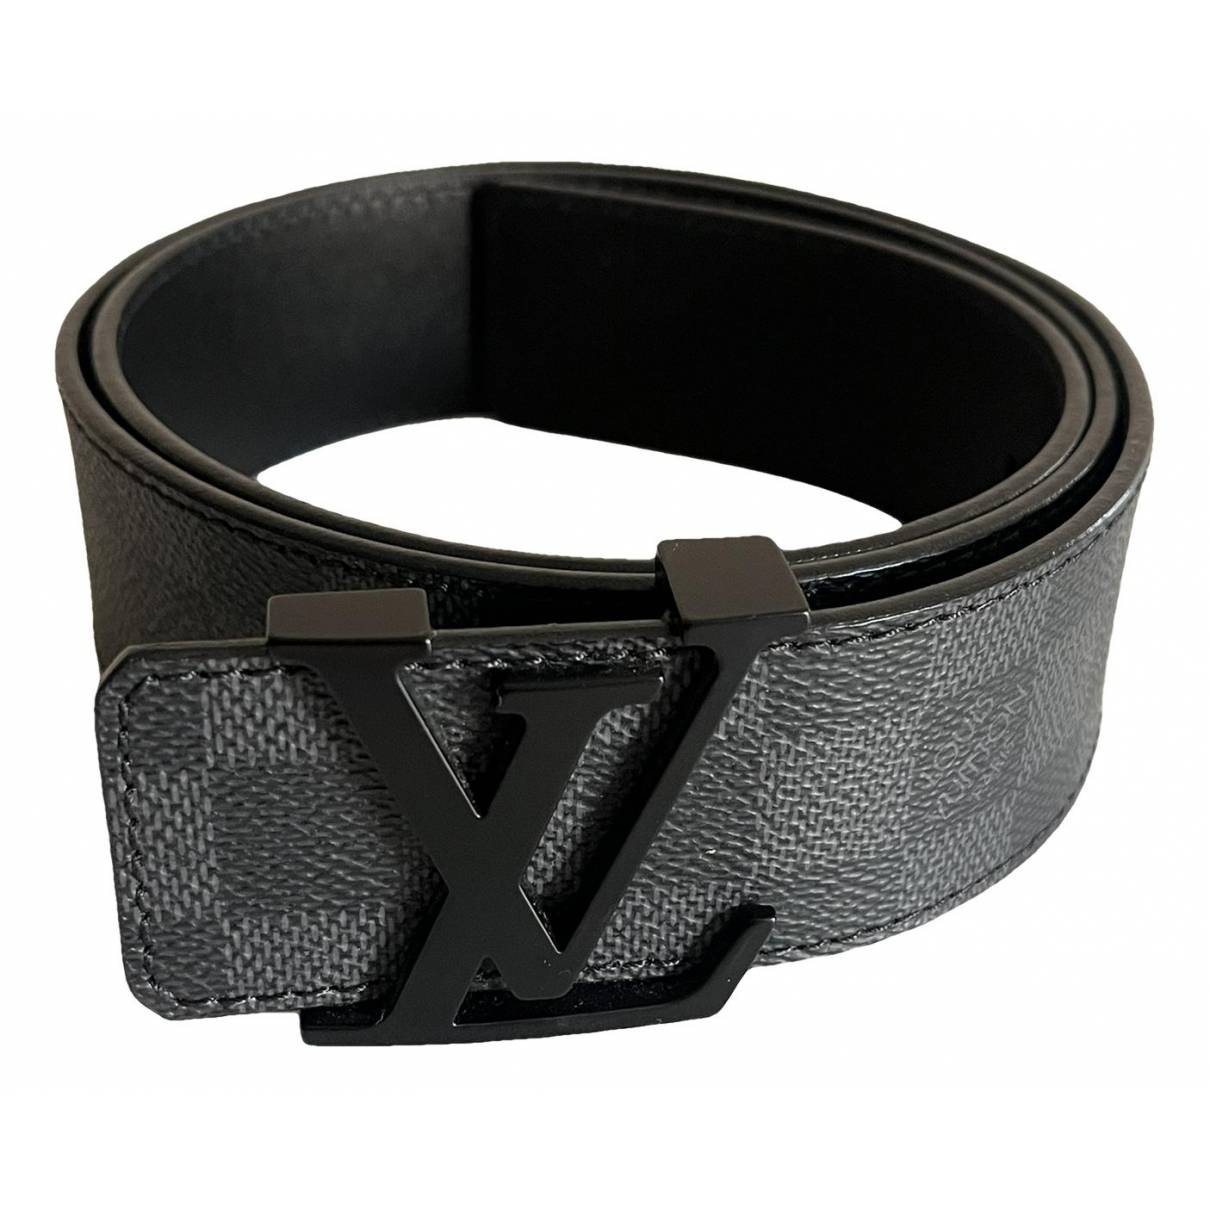 Initiales leather belt Louis Vuitton Grey size 90 cm in Leather